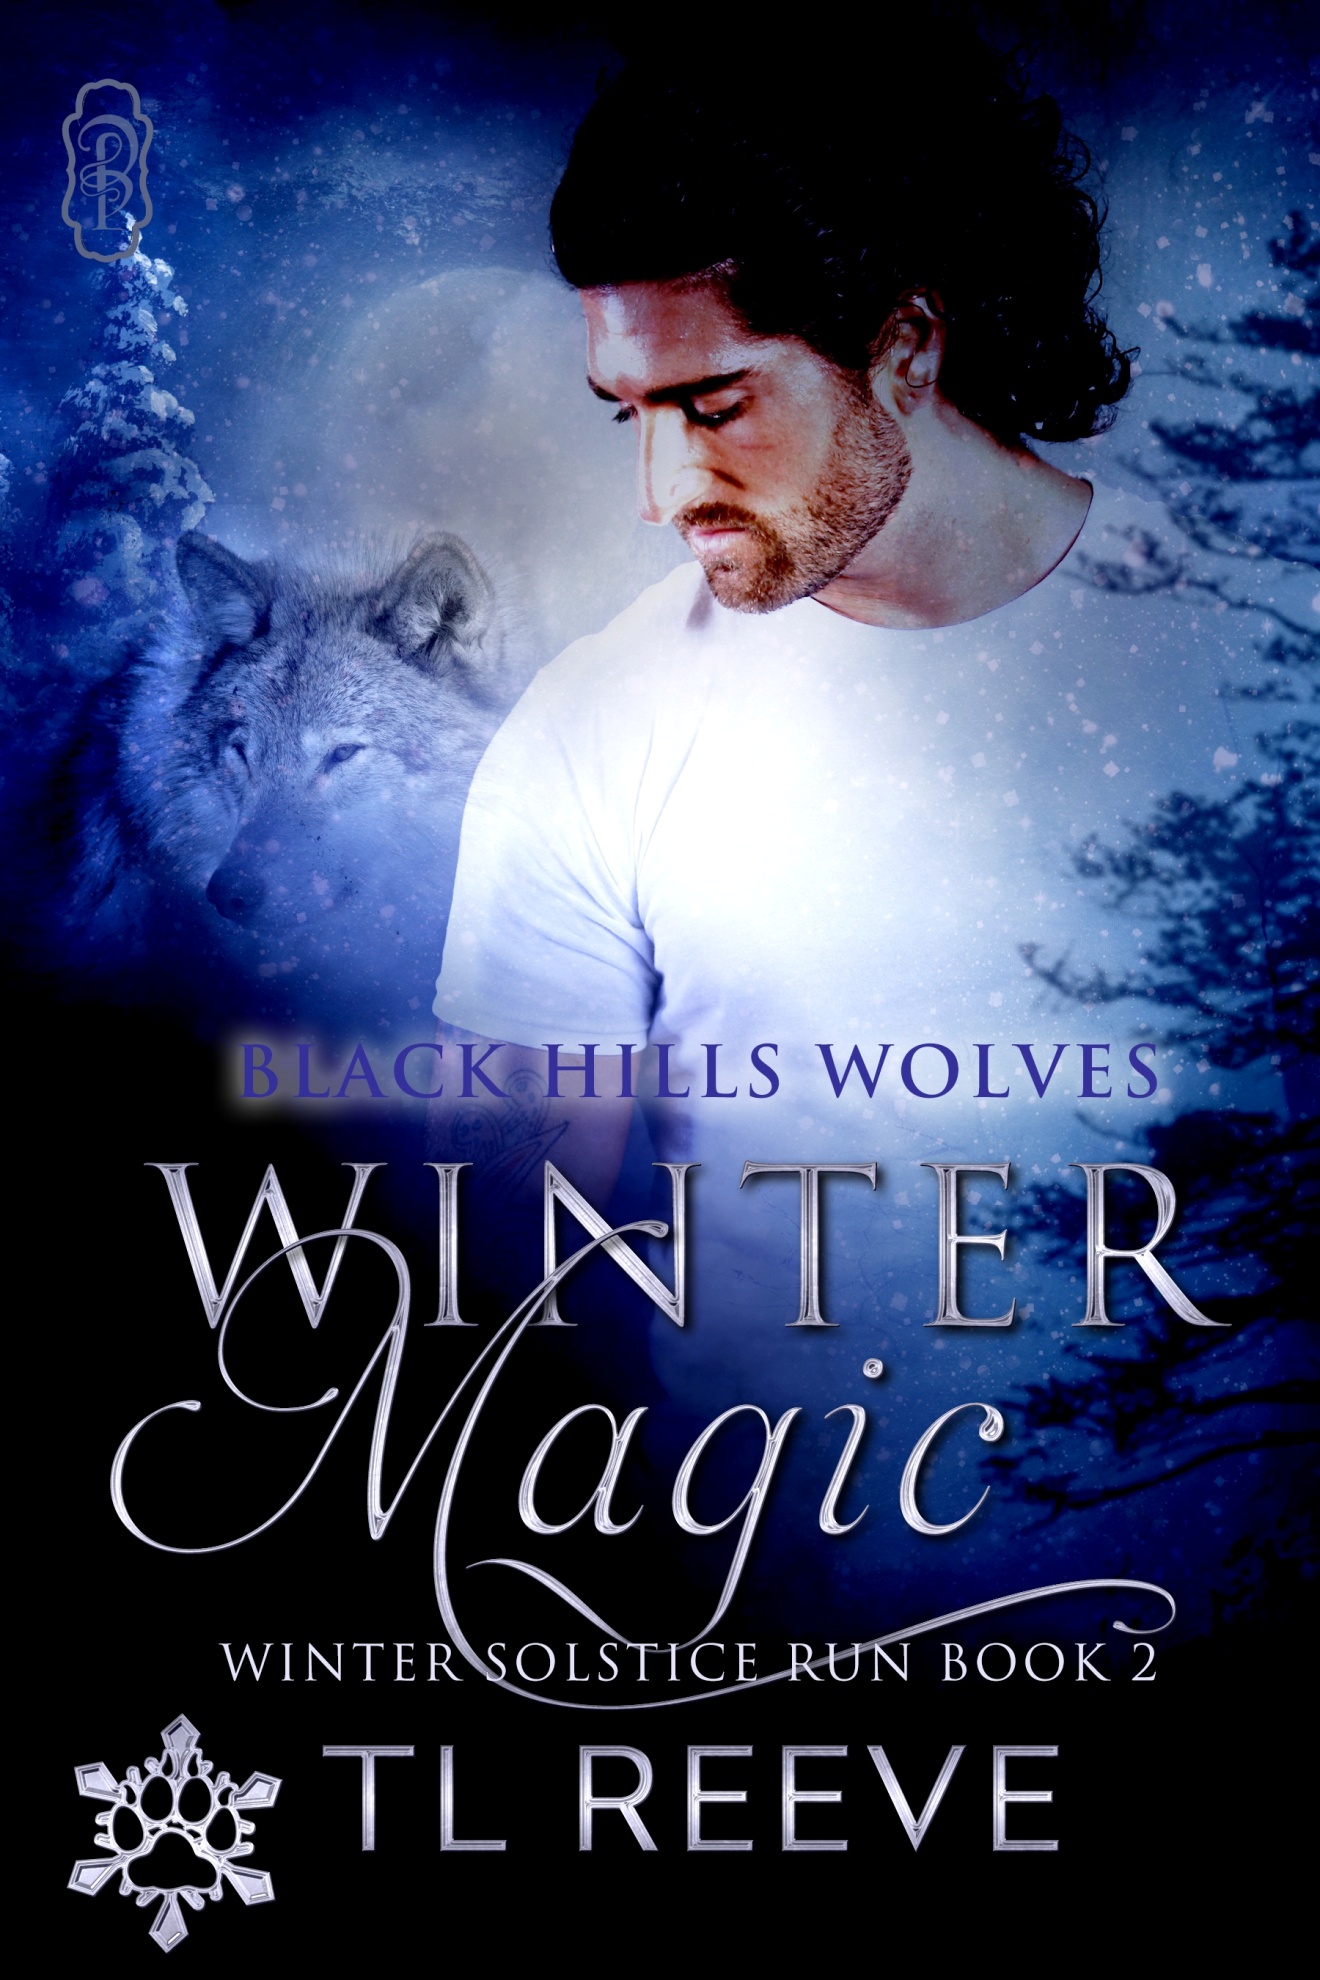 Read Winter Magic by TL Reeve online free full book.